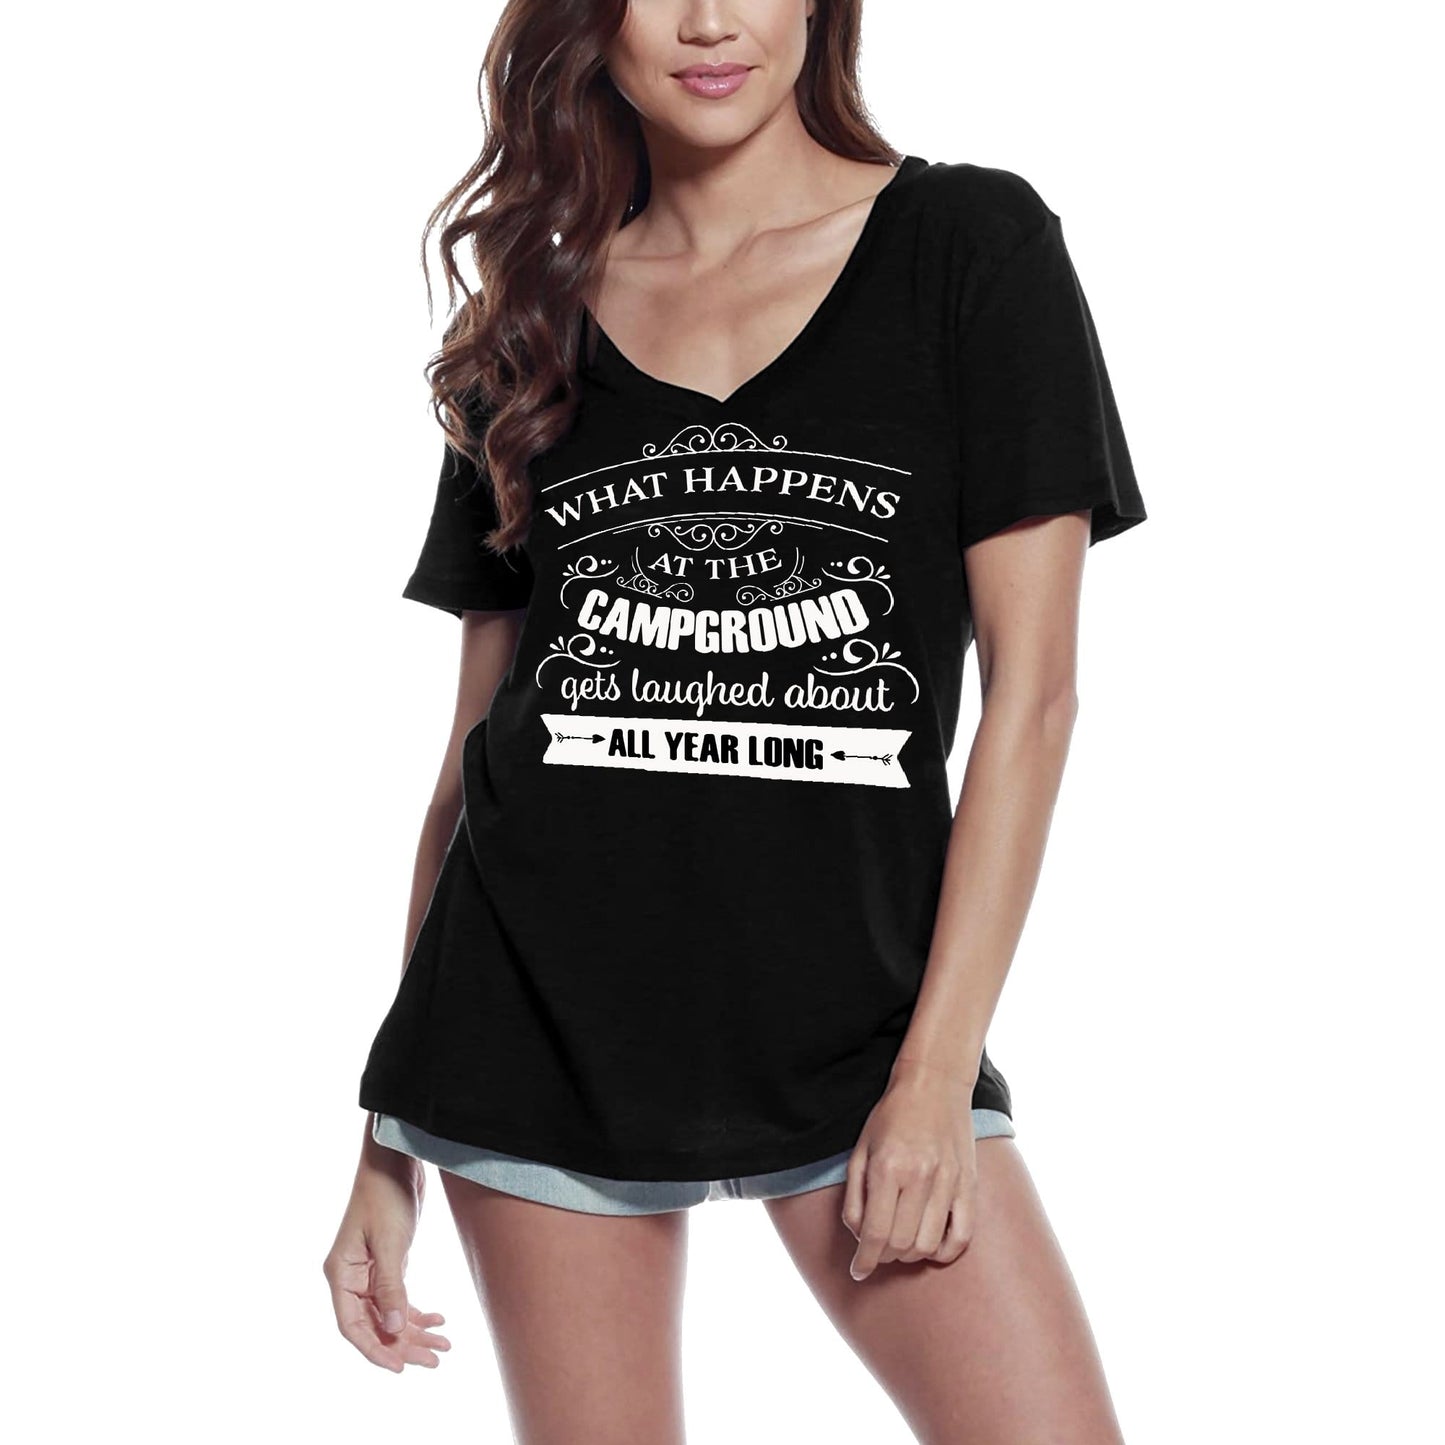 ULTRABASIC Women's T-Shirt What Happens at the Campground - Funny Short Sleeve Tee Shirt Tops